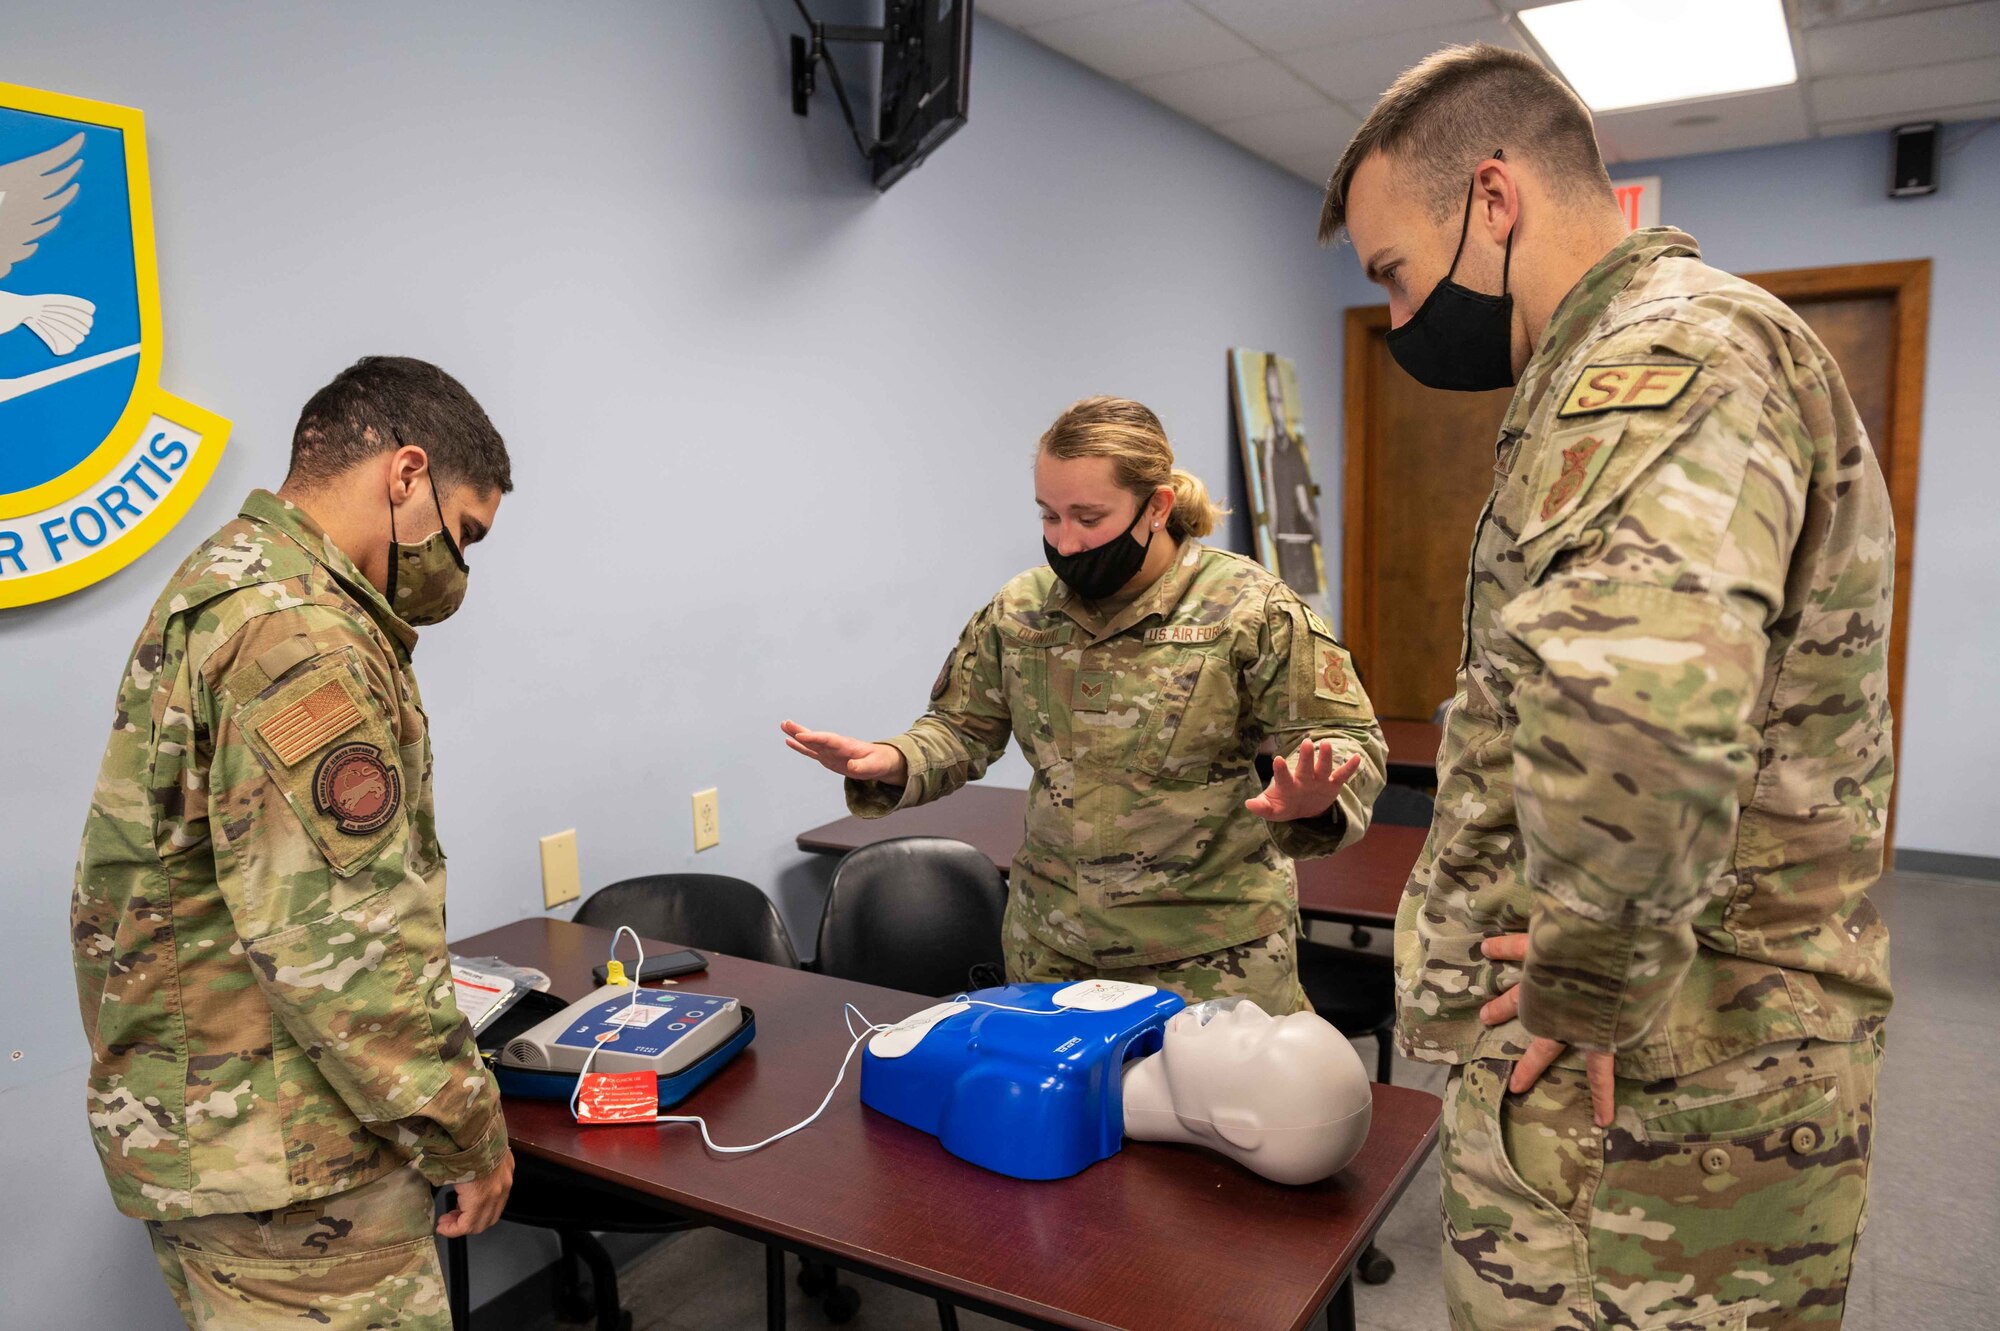 4th Security Forces Squadron members practice utilizing an automated external defibrillator on a mannequin during a CPR class at Seymour Johnson, North Carolina, Nov. 9, 2021. An AED is used to check a subject heart rhythm and send shocks to restore the heart to a normal heart rate. (U.S. Air Force photo by Airmen 1st Class Sabrina Fuller.)